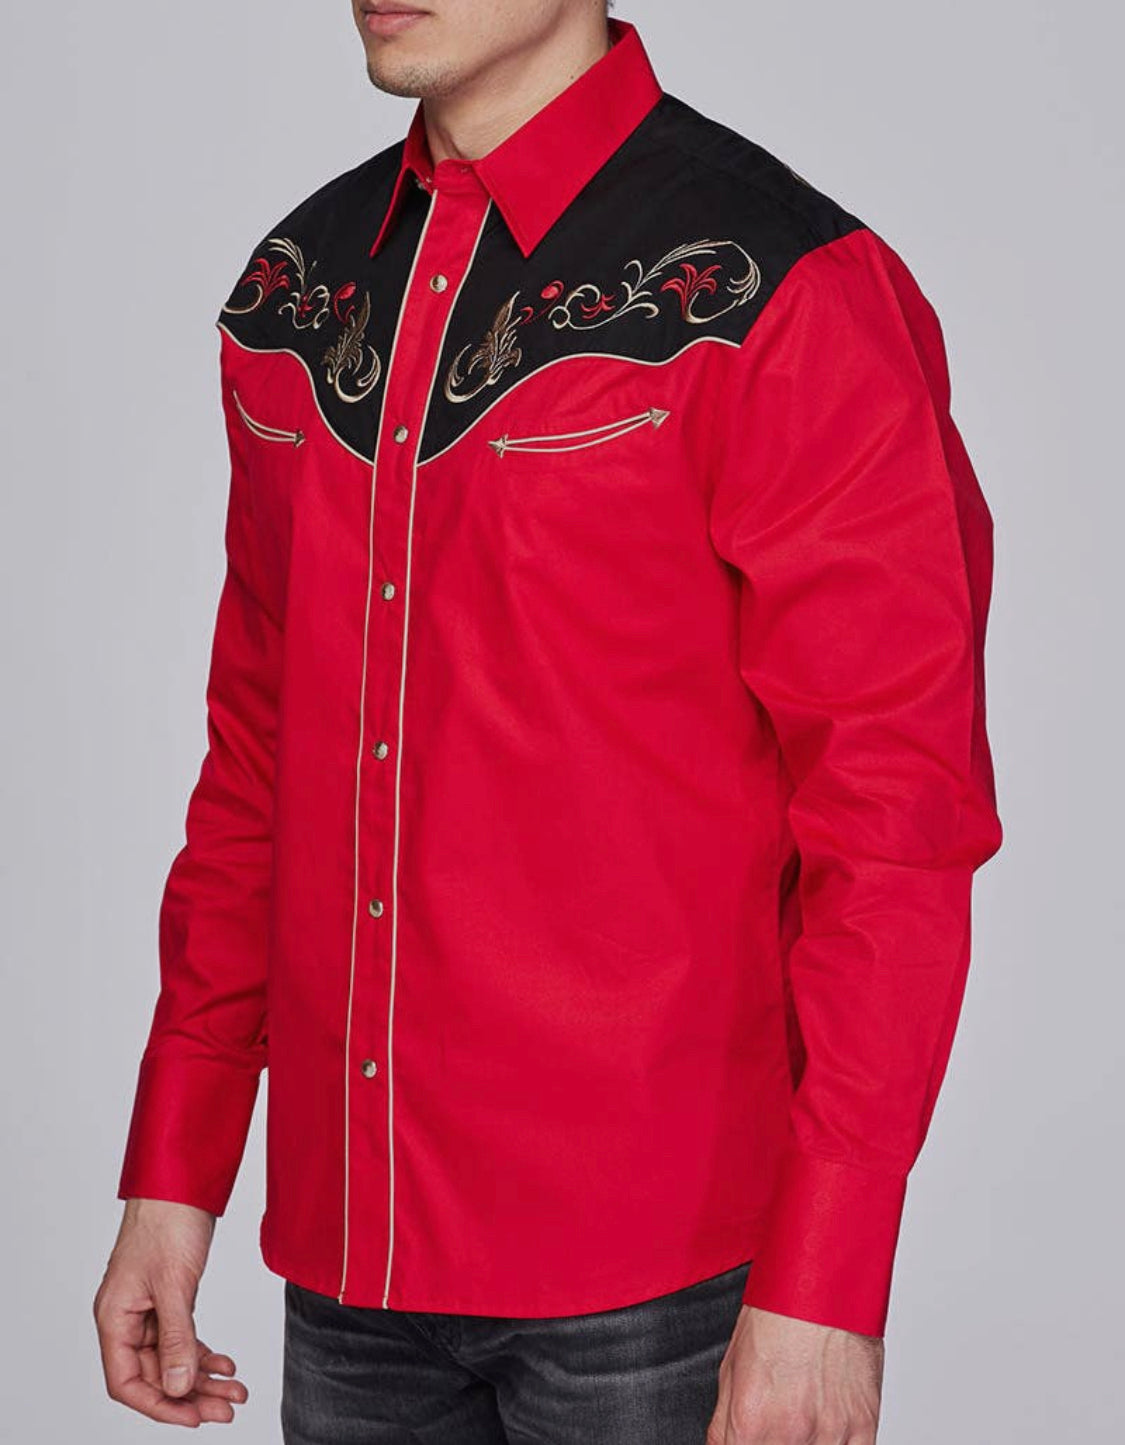 WESTERN EMBROIDERY SHIRT RED